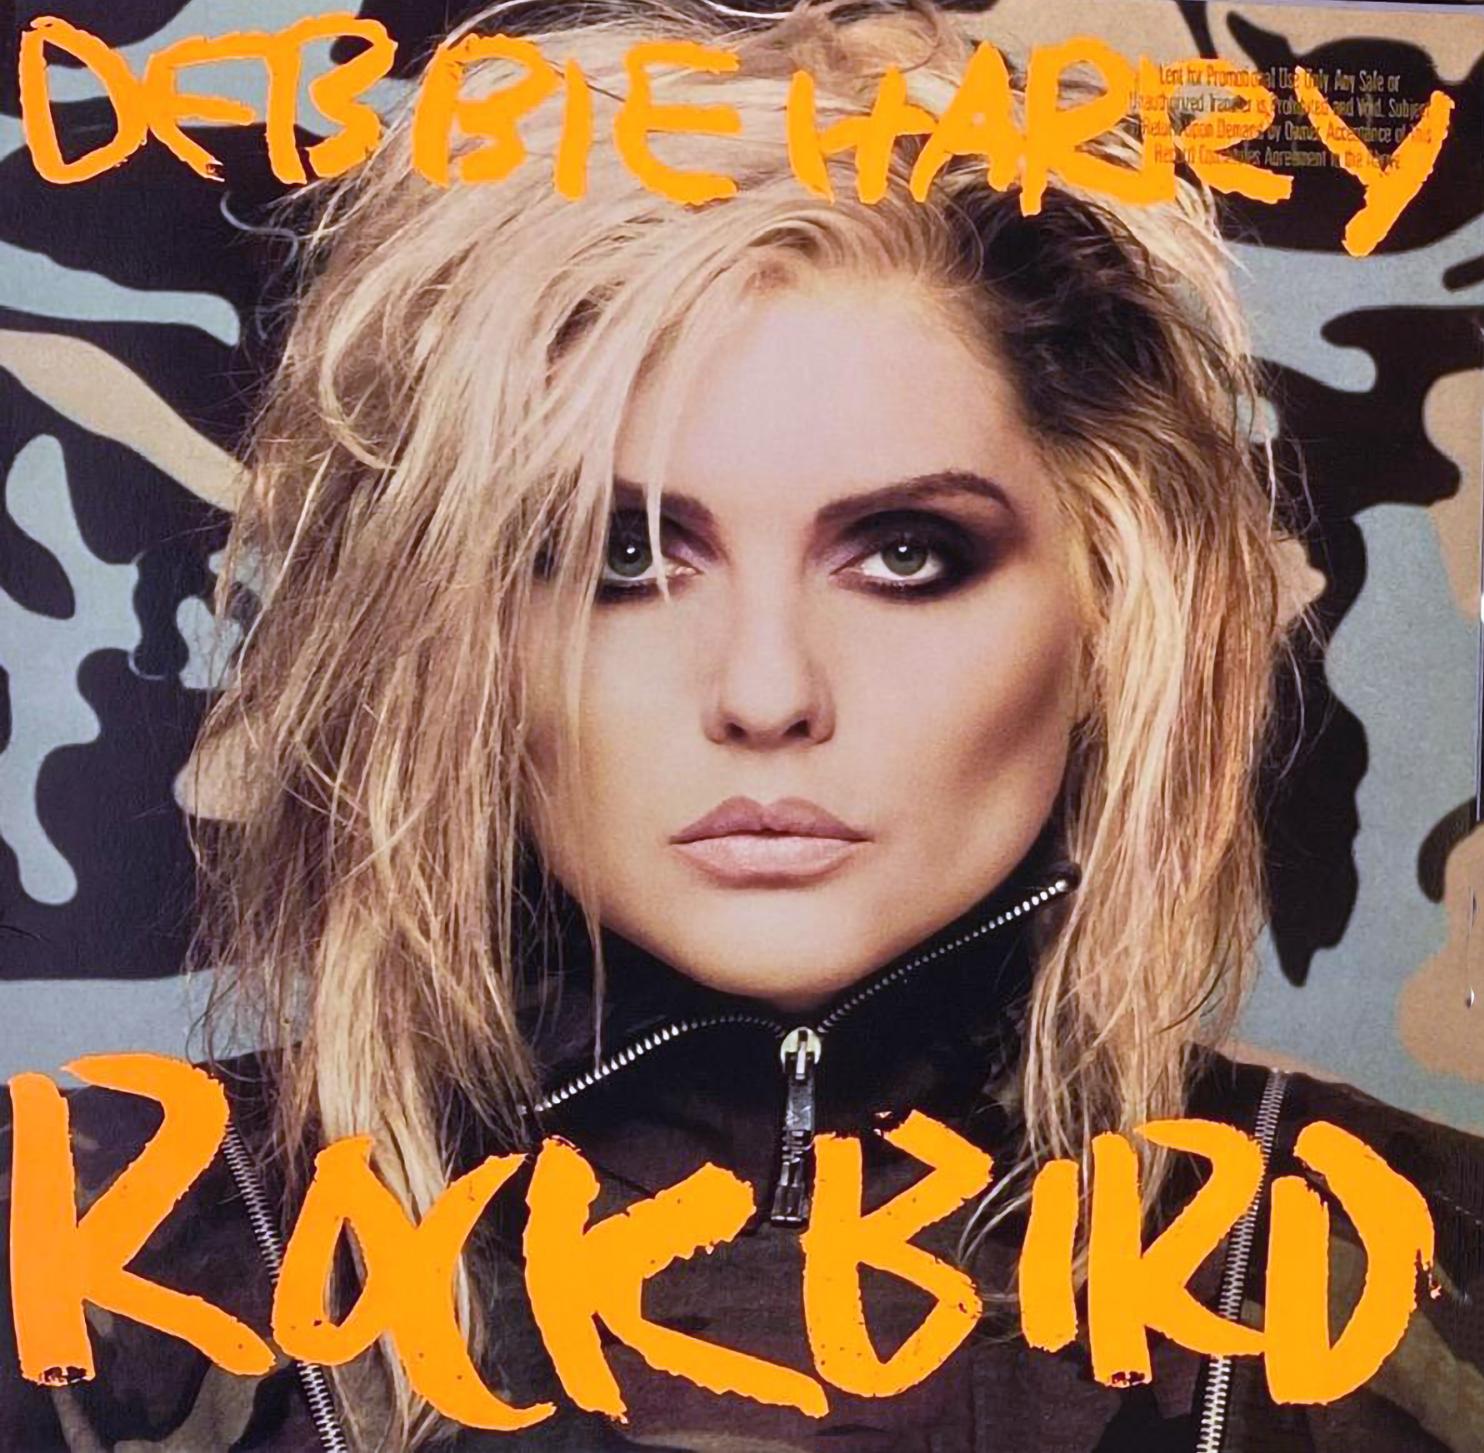 Andy Warhol Debbie Harry Album Art: Set of 4 individual works (Andy Warhol record art): 
Debbie Harry, Rockbird vinyl album featuring original 1980s cover art by Andy Warhol & Stephen Sprouse (lettering).
Featured prominently in 'Andy Warhol: The